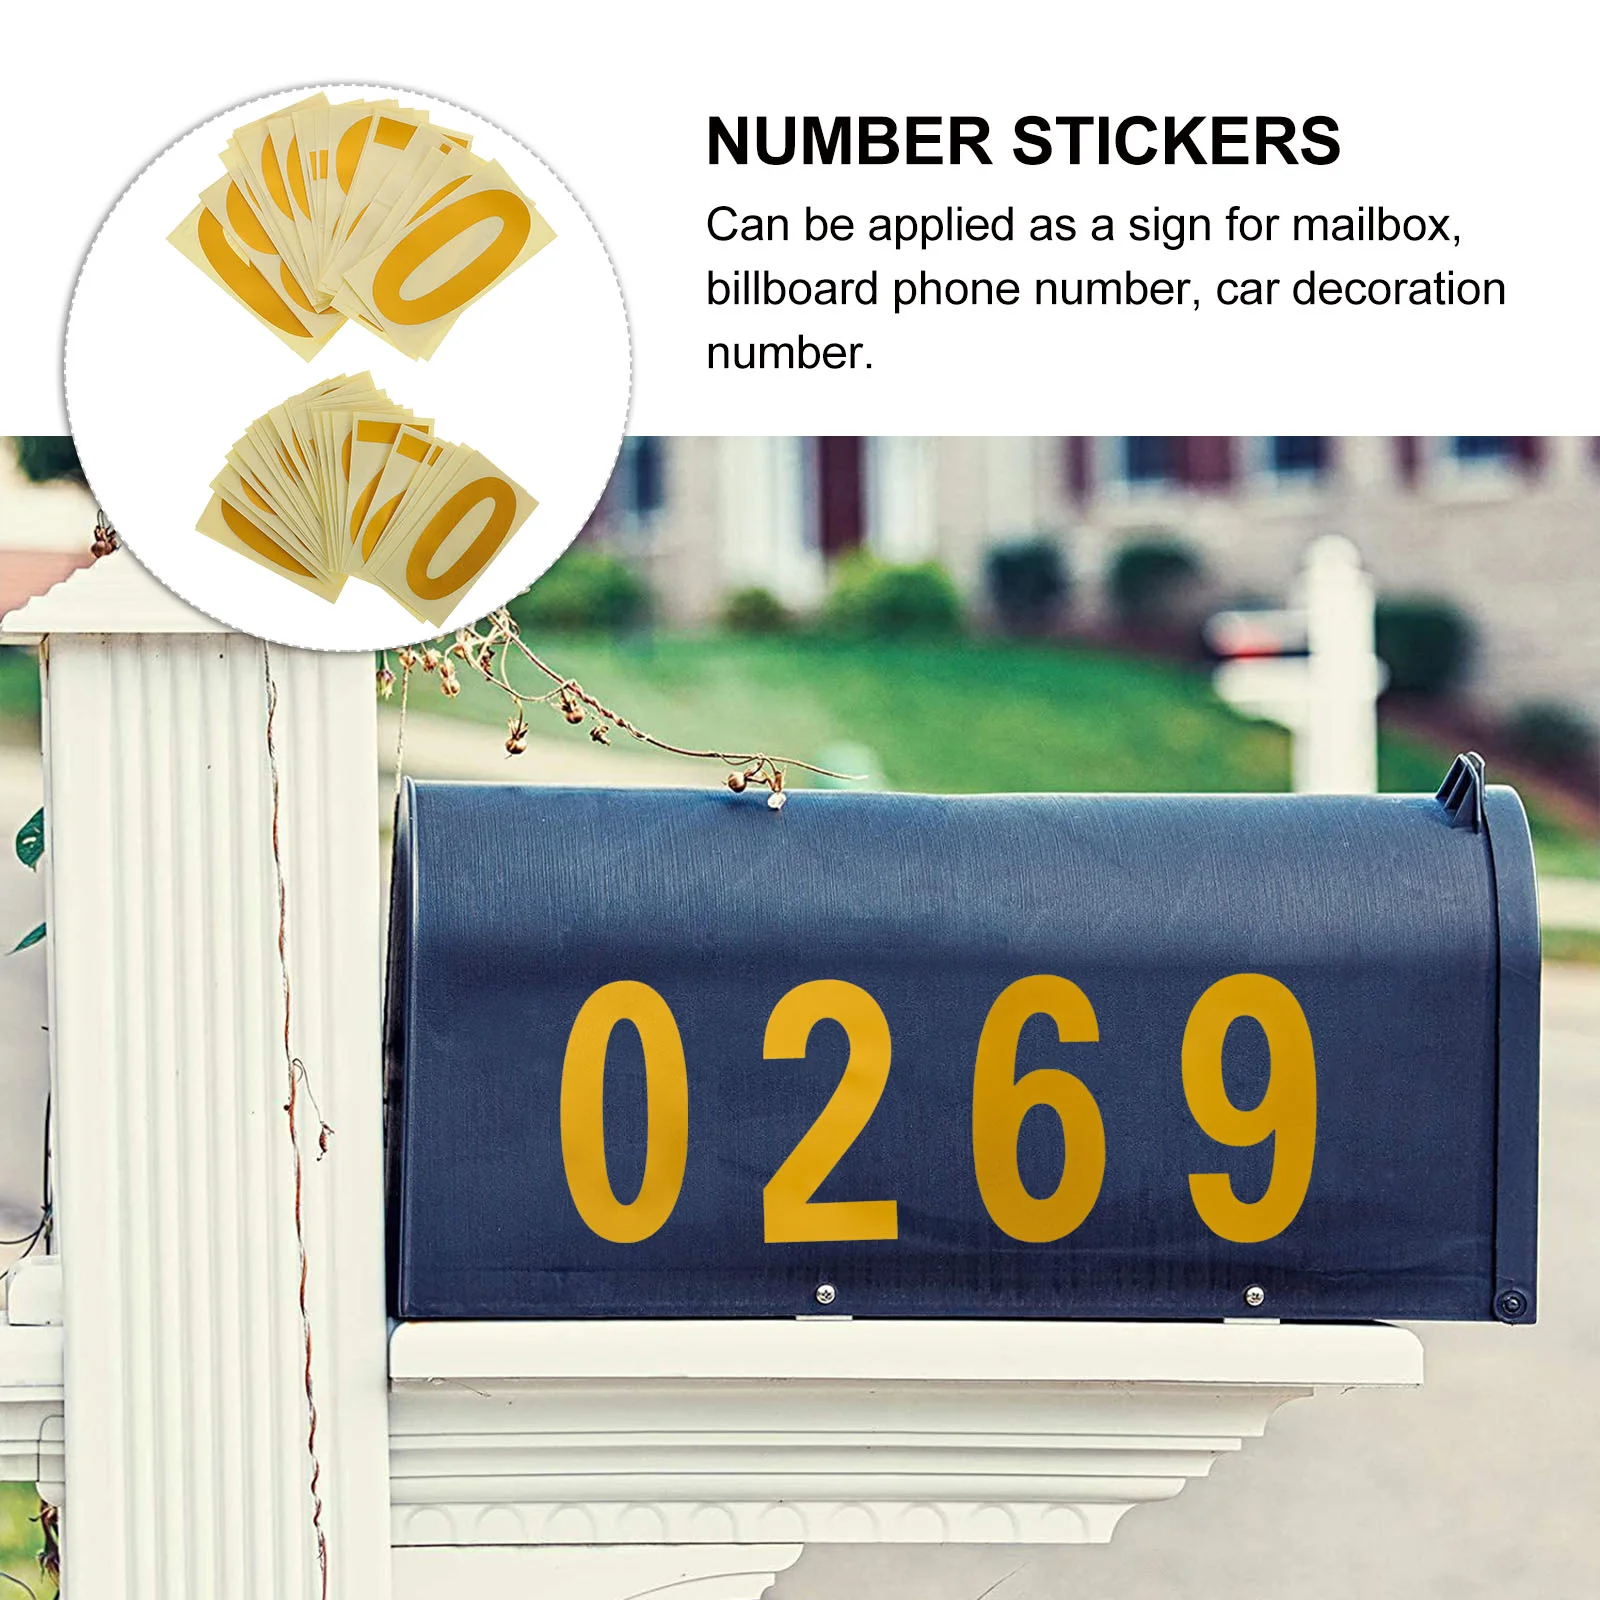 Mailbox Stickers Self Adhesive Decal Reflective Numbers Self-adhesive  Doorplate Letter Decals Letters - AliExpress